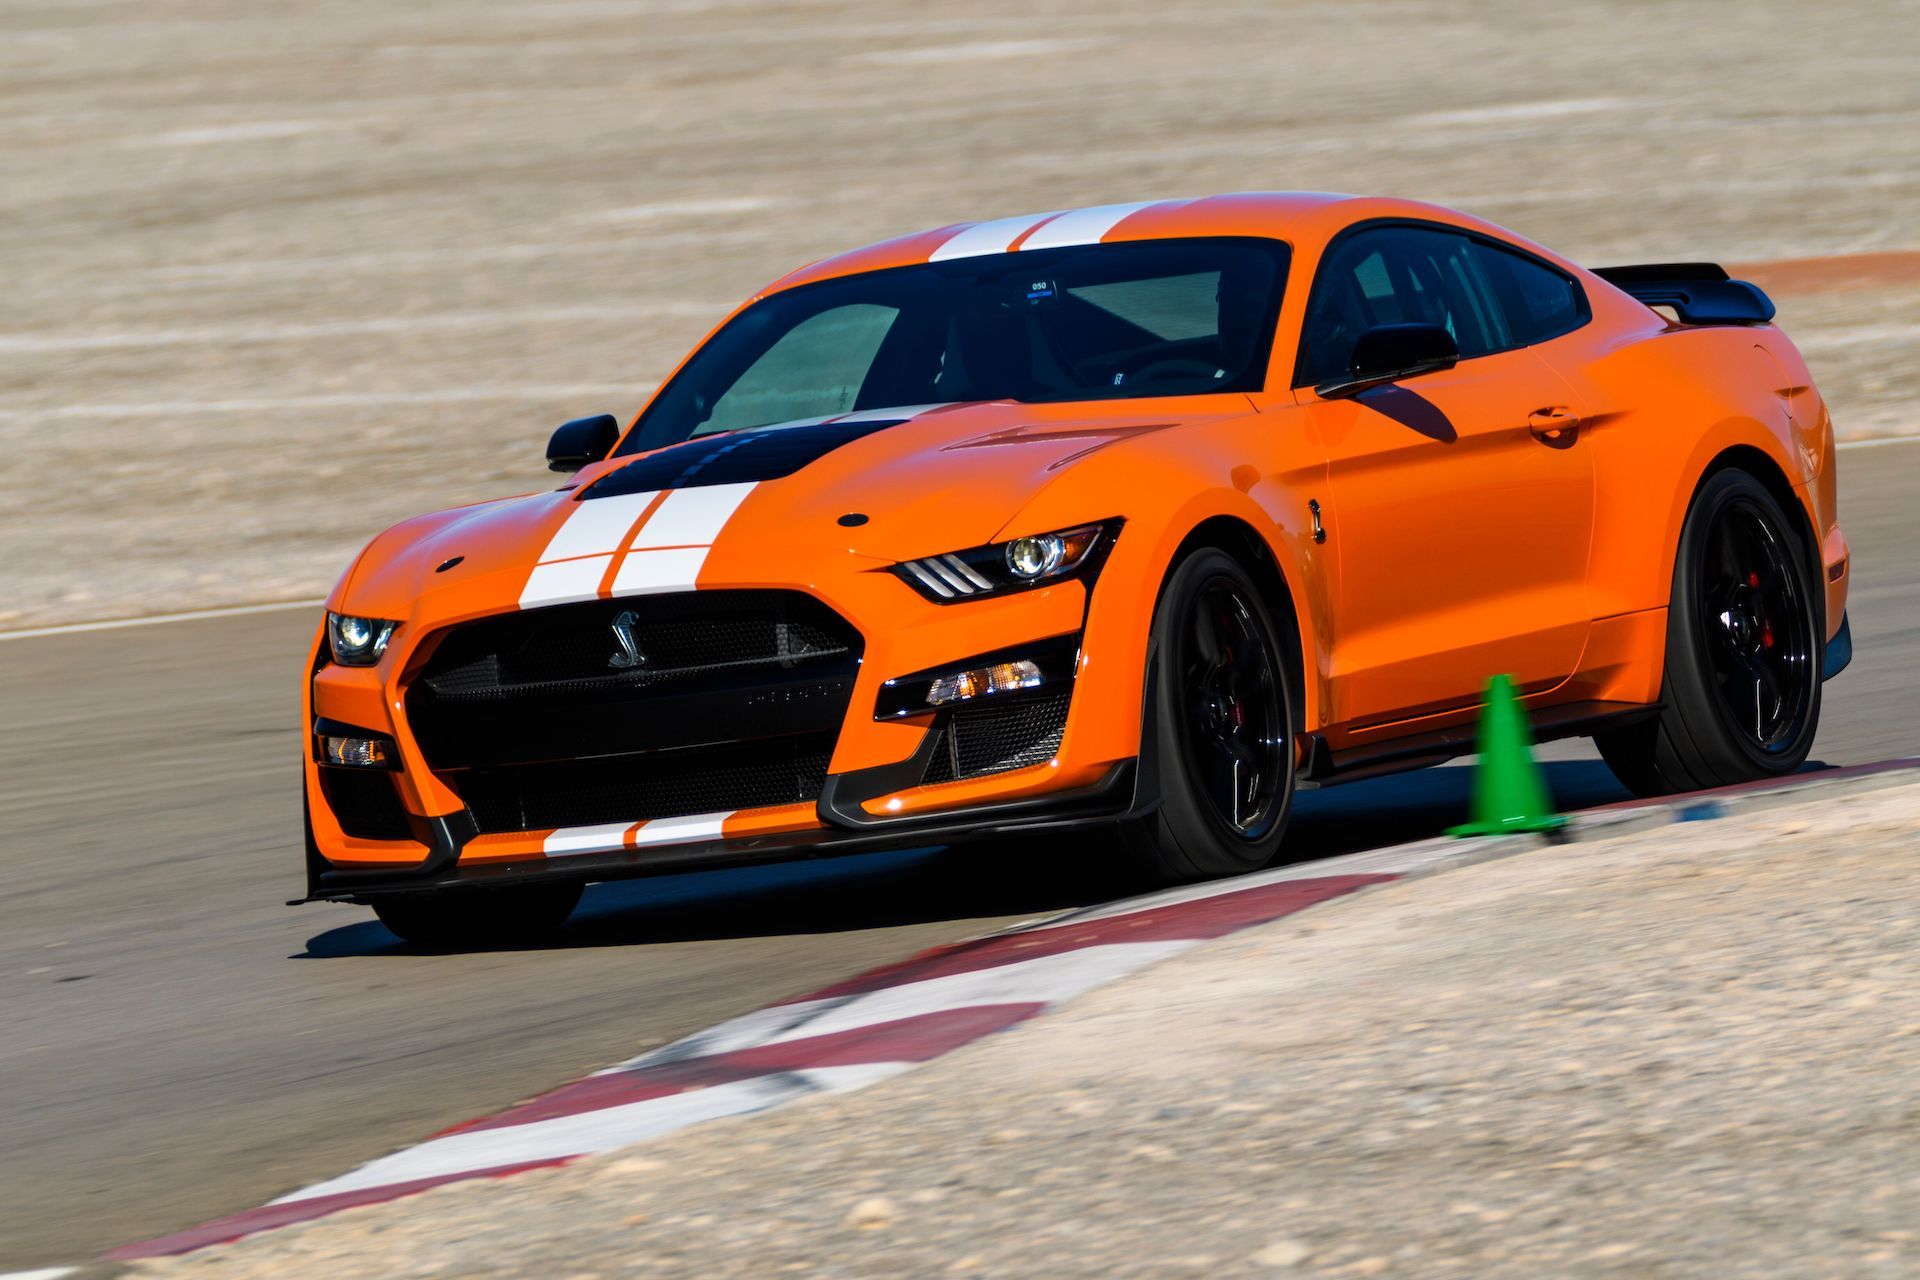 Another track day in the day of the GT500